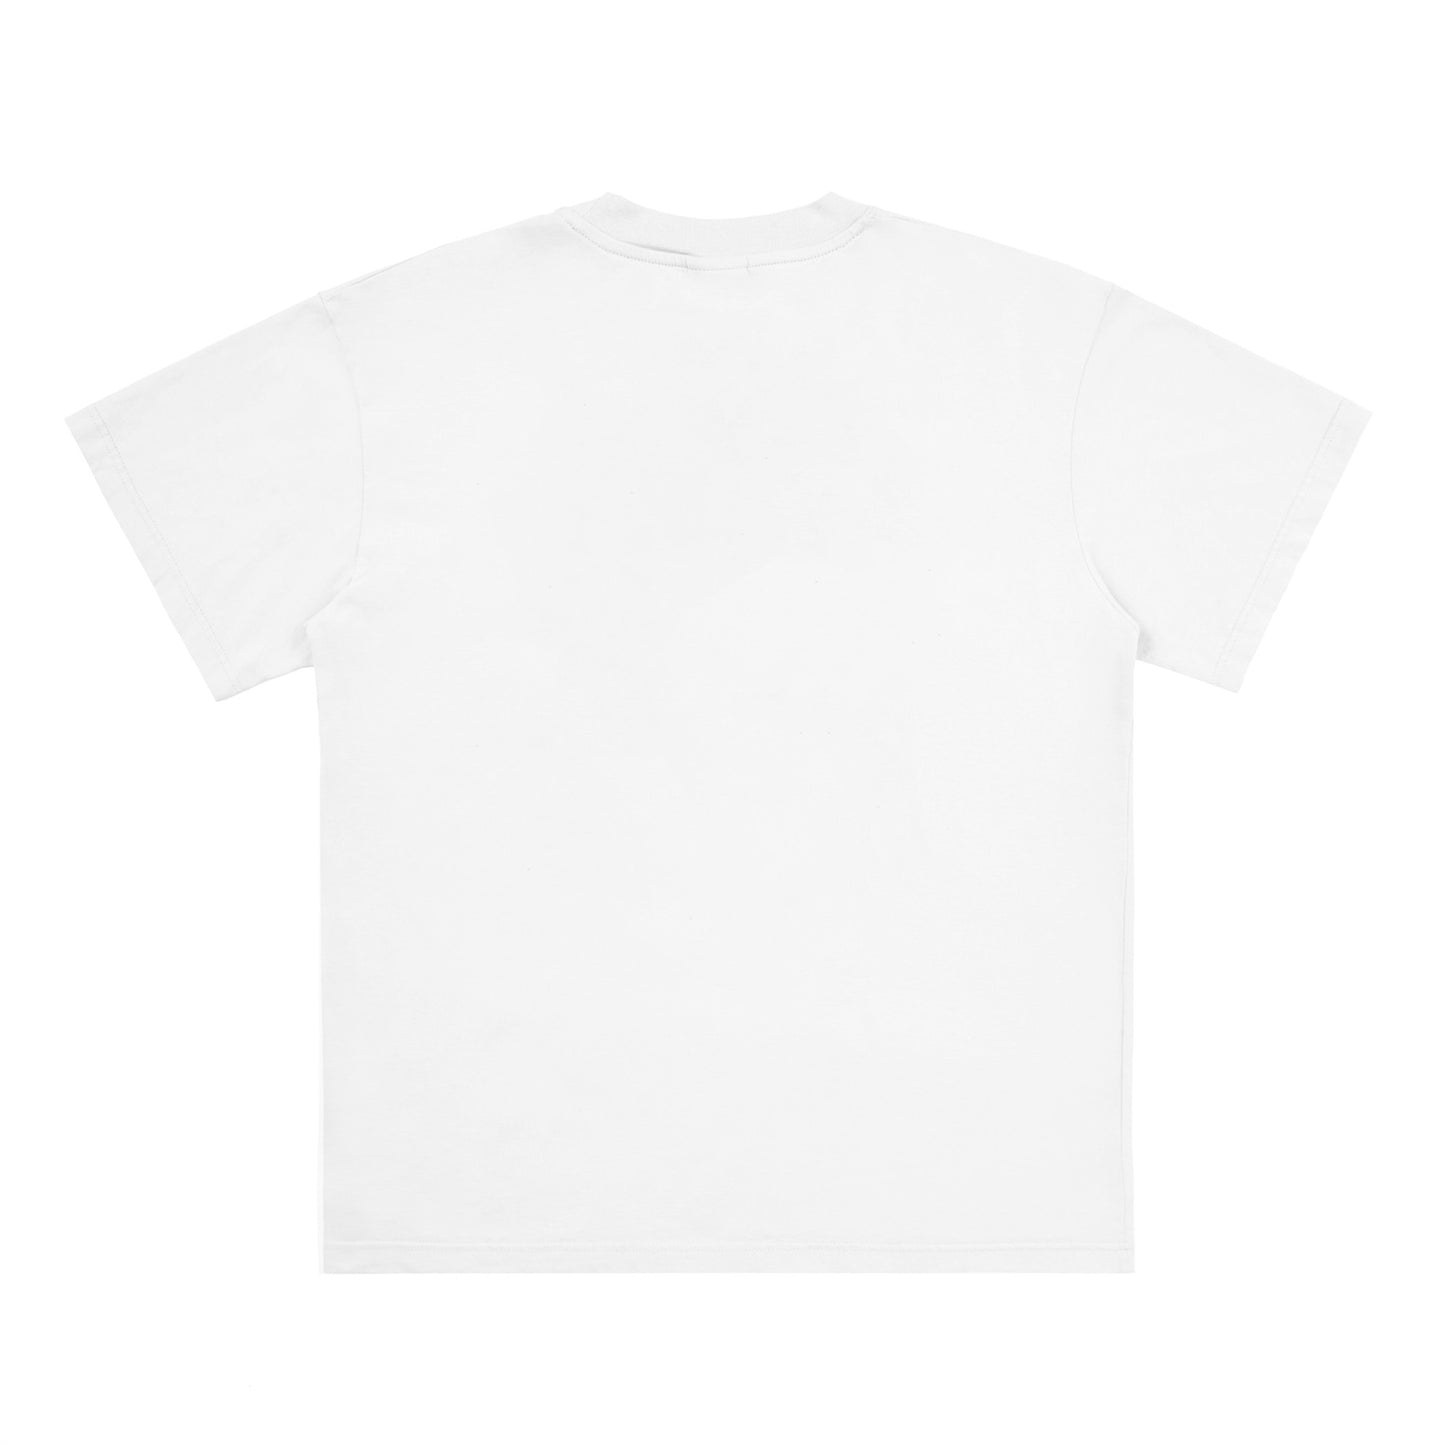 COLLEGE '24 – T-SHIRT (WH)